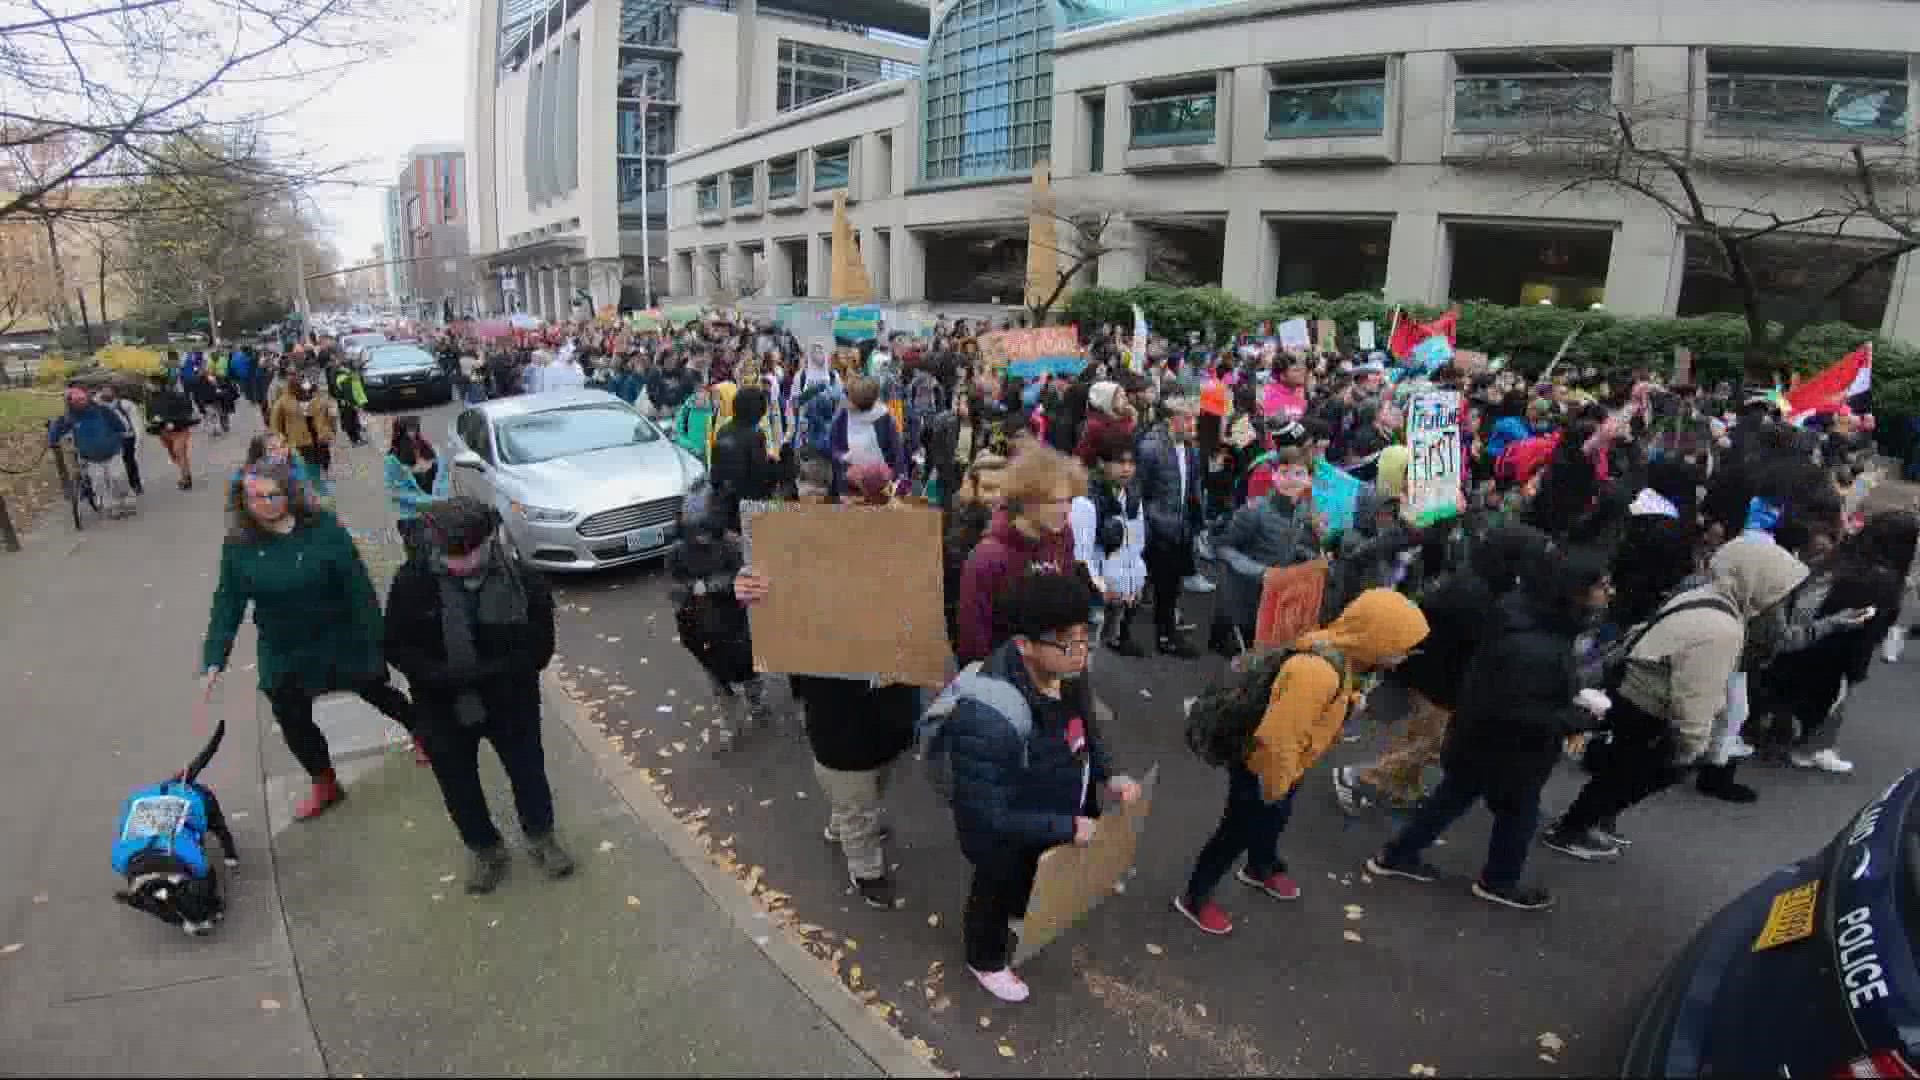 High schoolers from across Portland plan to gather at City Hall in the morning. In the afternoon they’ll march to Revolution Hall for the Portland Climate Festival.